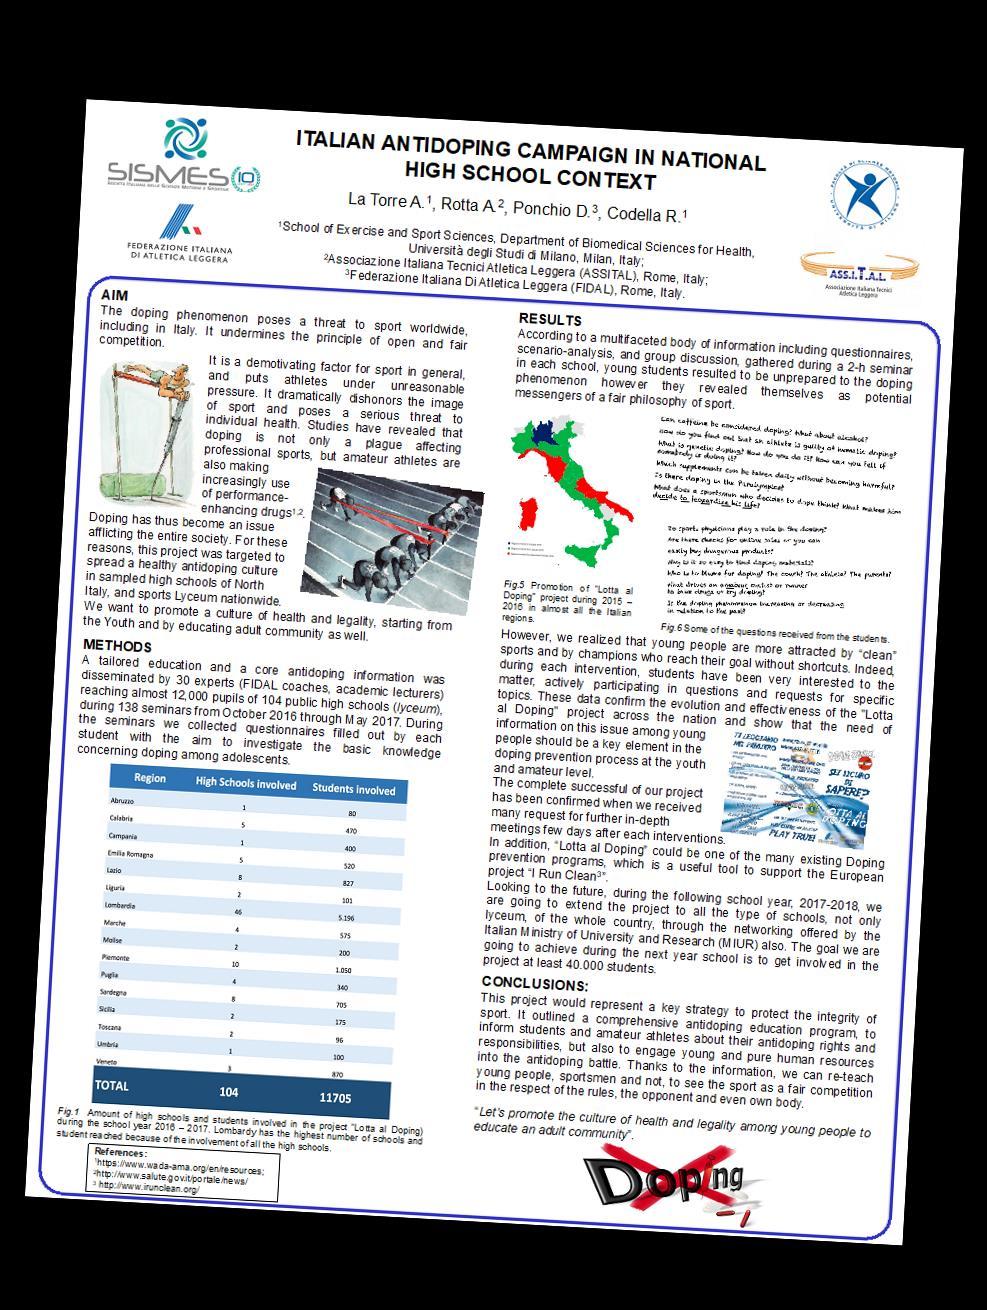 Doping off-side in the scientific community The project has been presented in a scientific congress for the first time on September 30, 2017 at IX SISMES National Congress